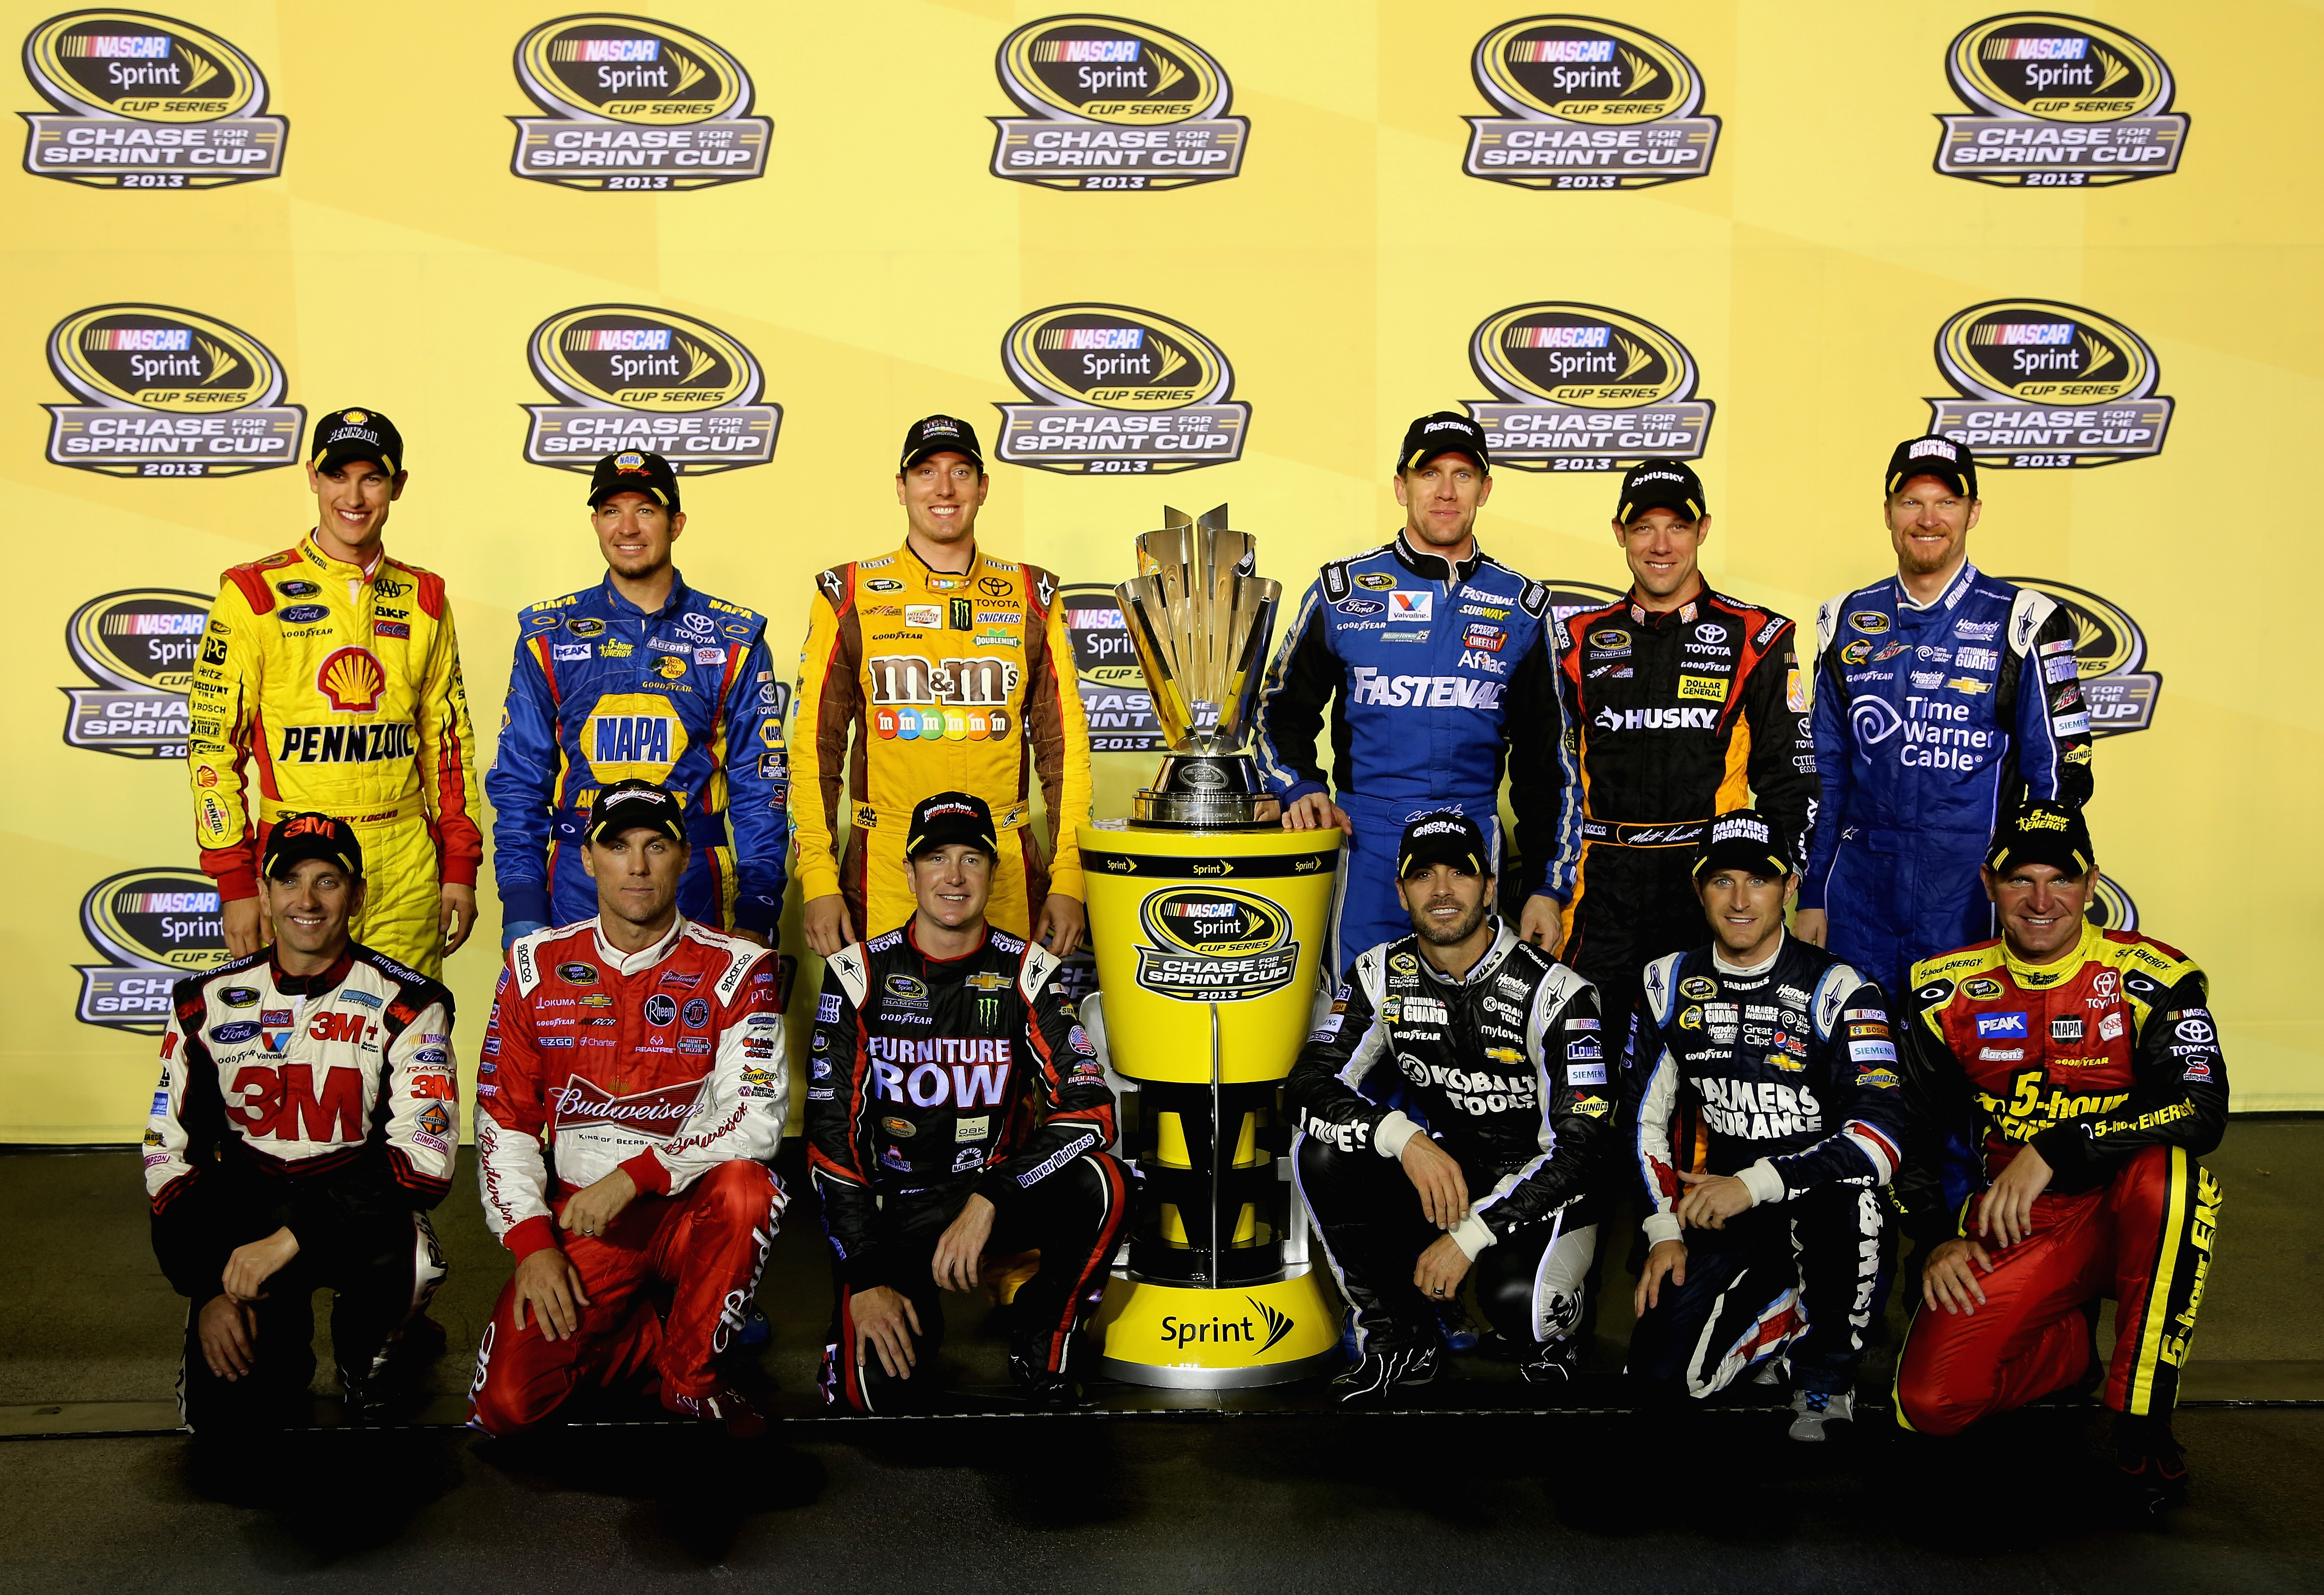 The 2014 Chase for the Sprint Cup takes on a dramatically different look and format to determine the champion.